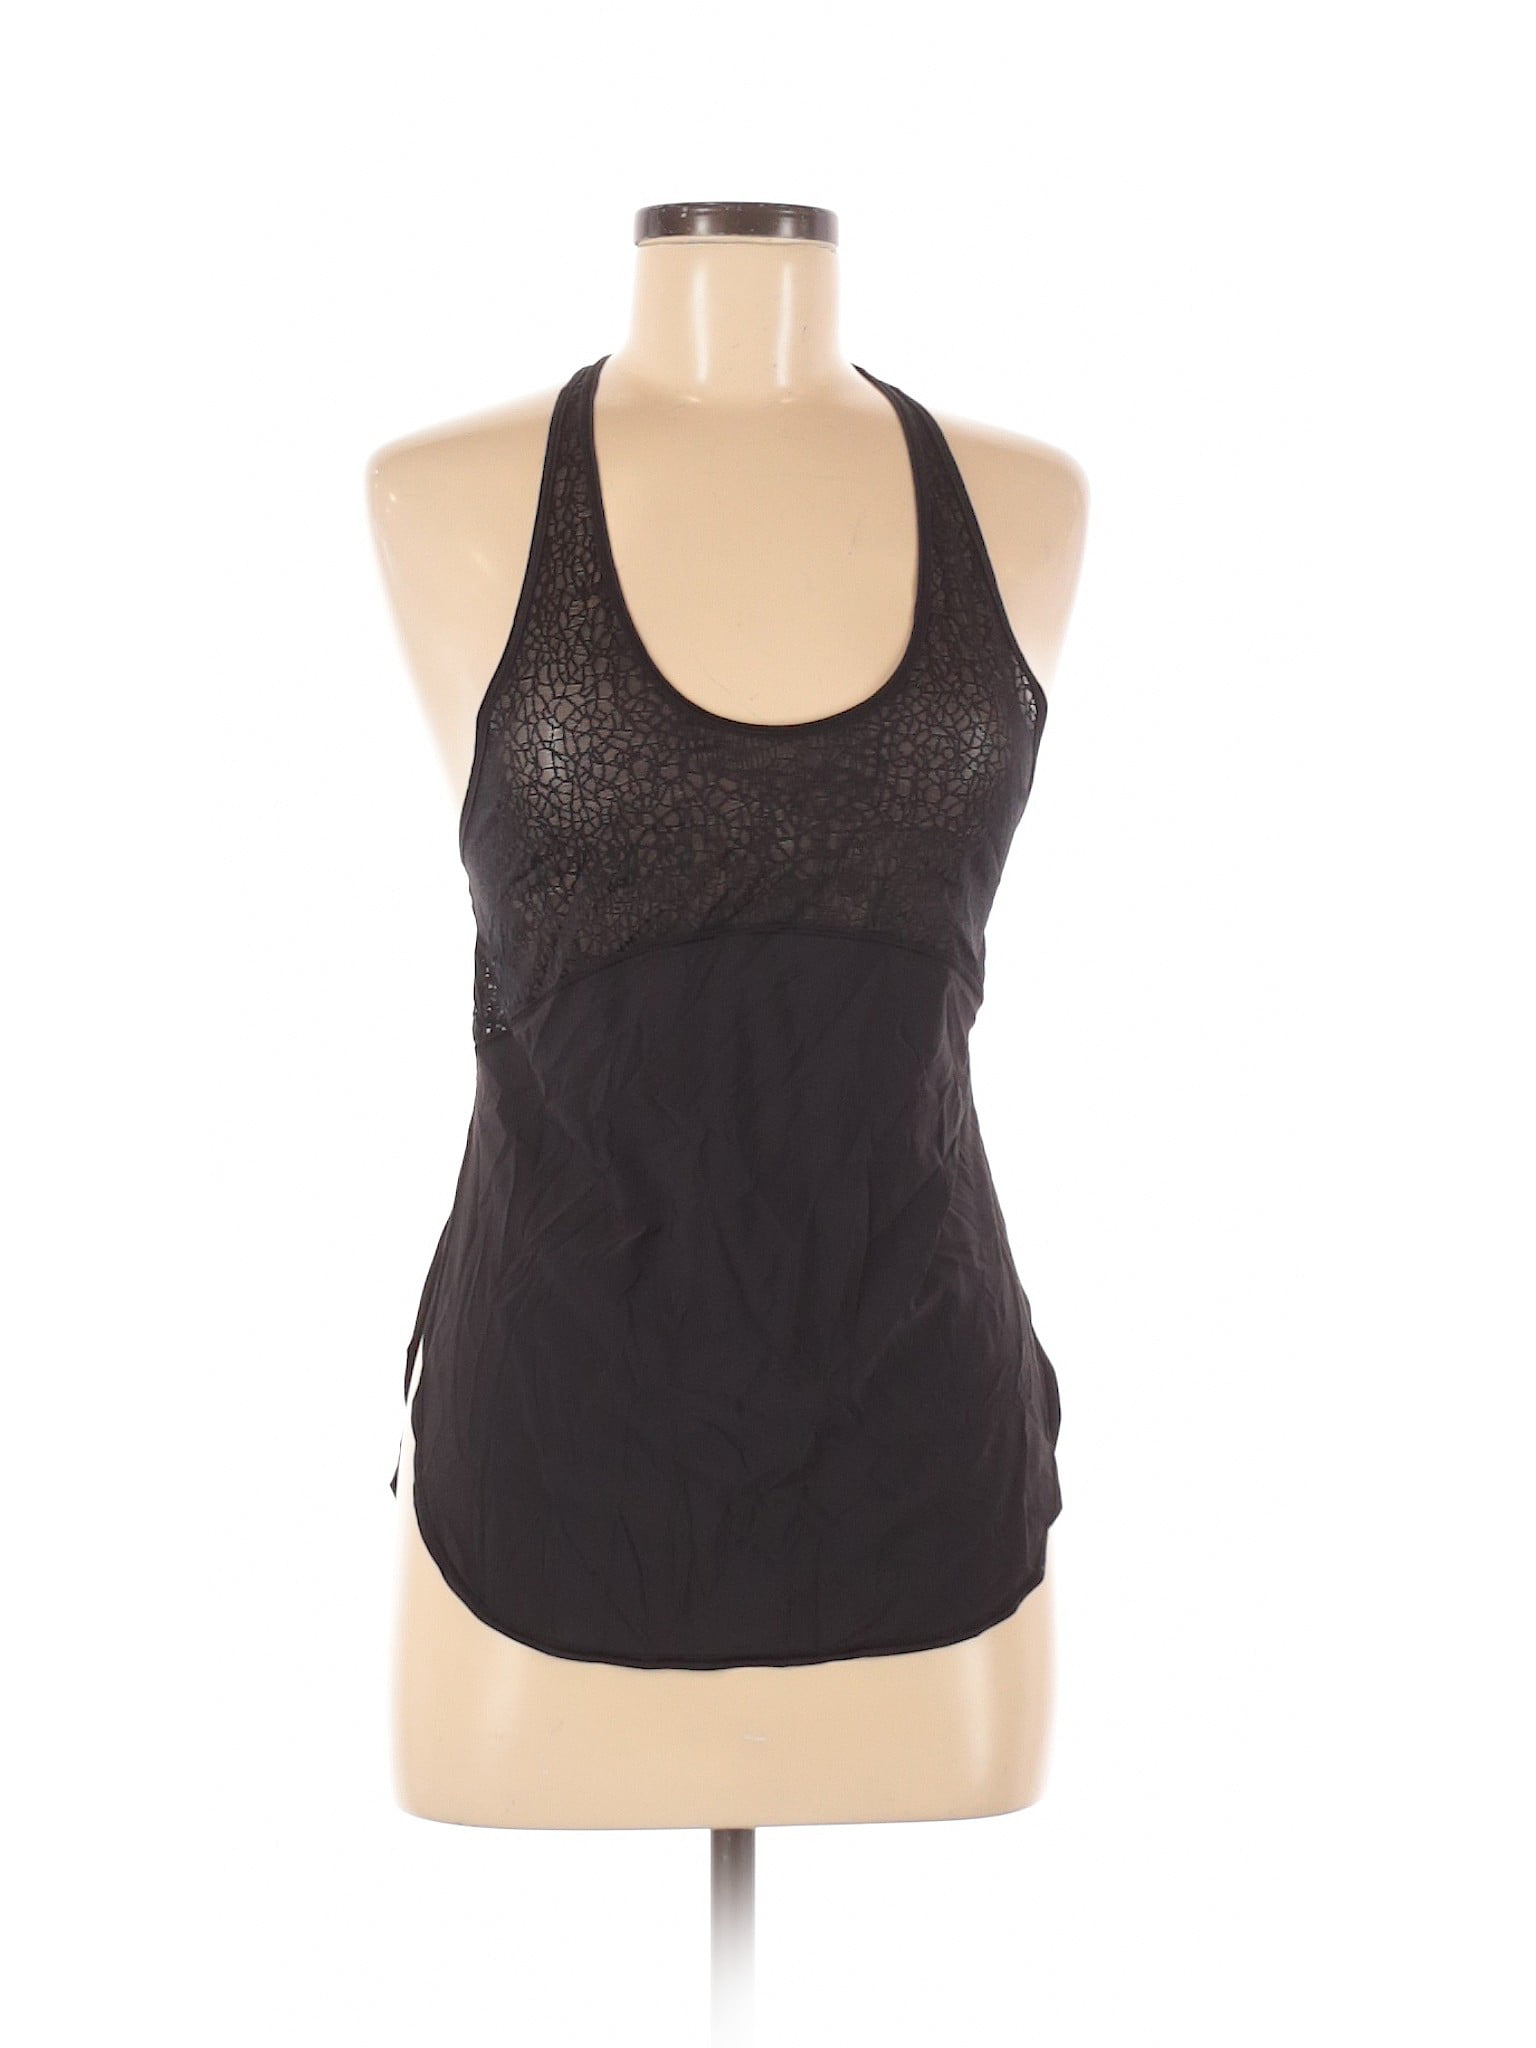 Pre-Owned Lululemon Athletica Womens Size 8 Active India